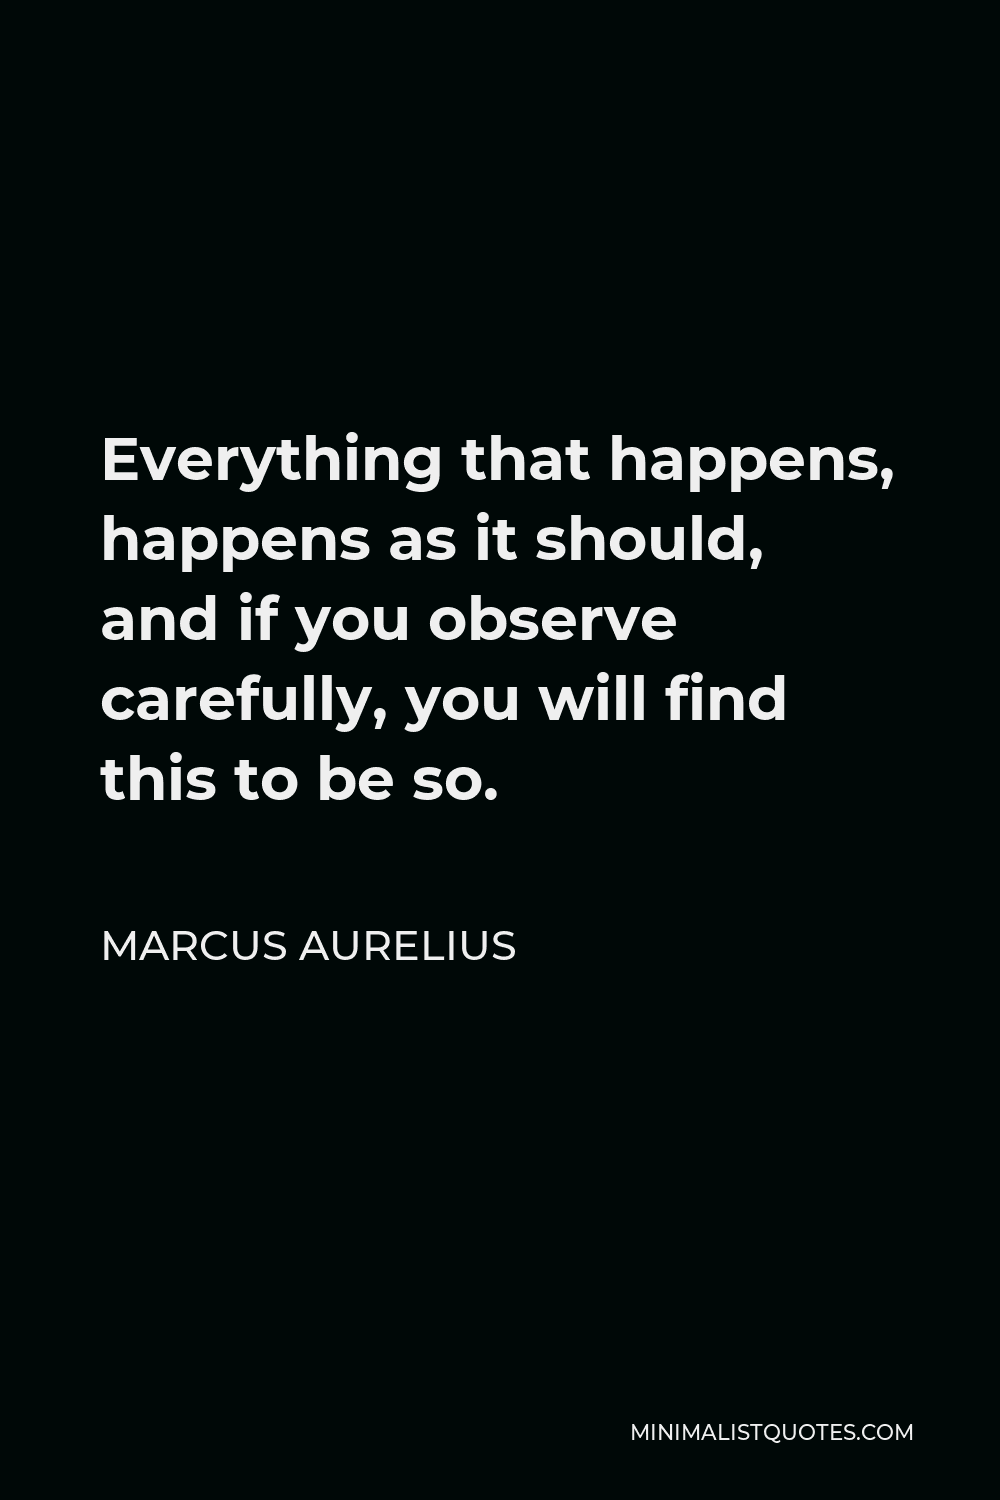 Marcus Aurelius Quote - Everything that happens, happens as it should, and if you observe carefully, you will find this to be so.